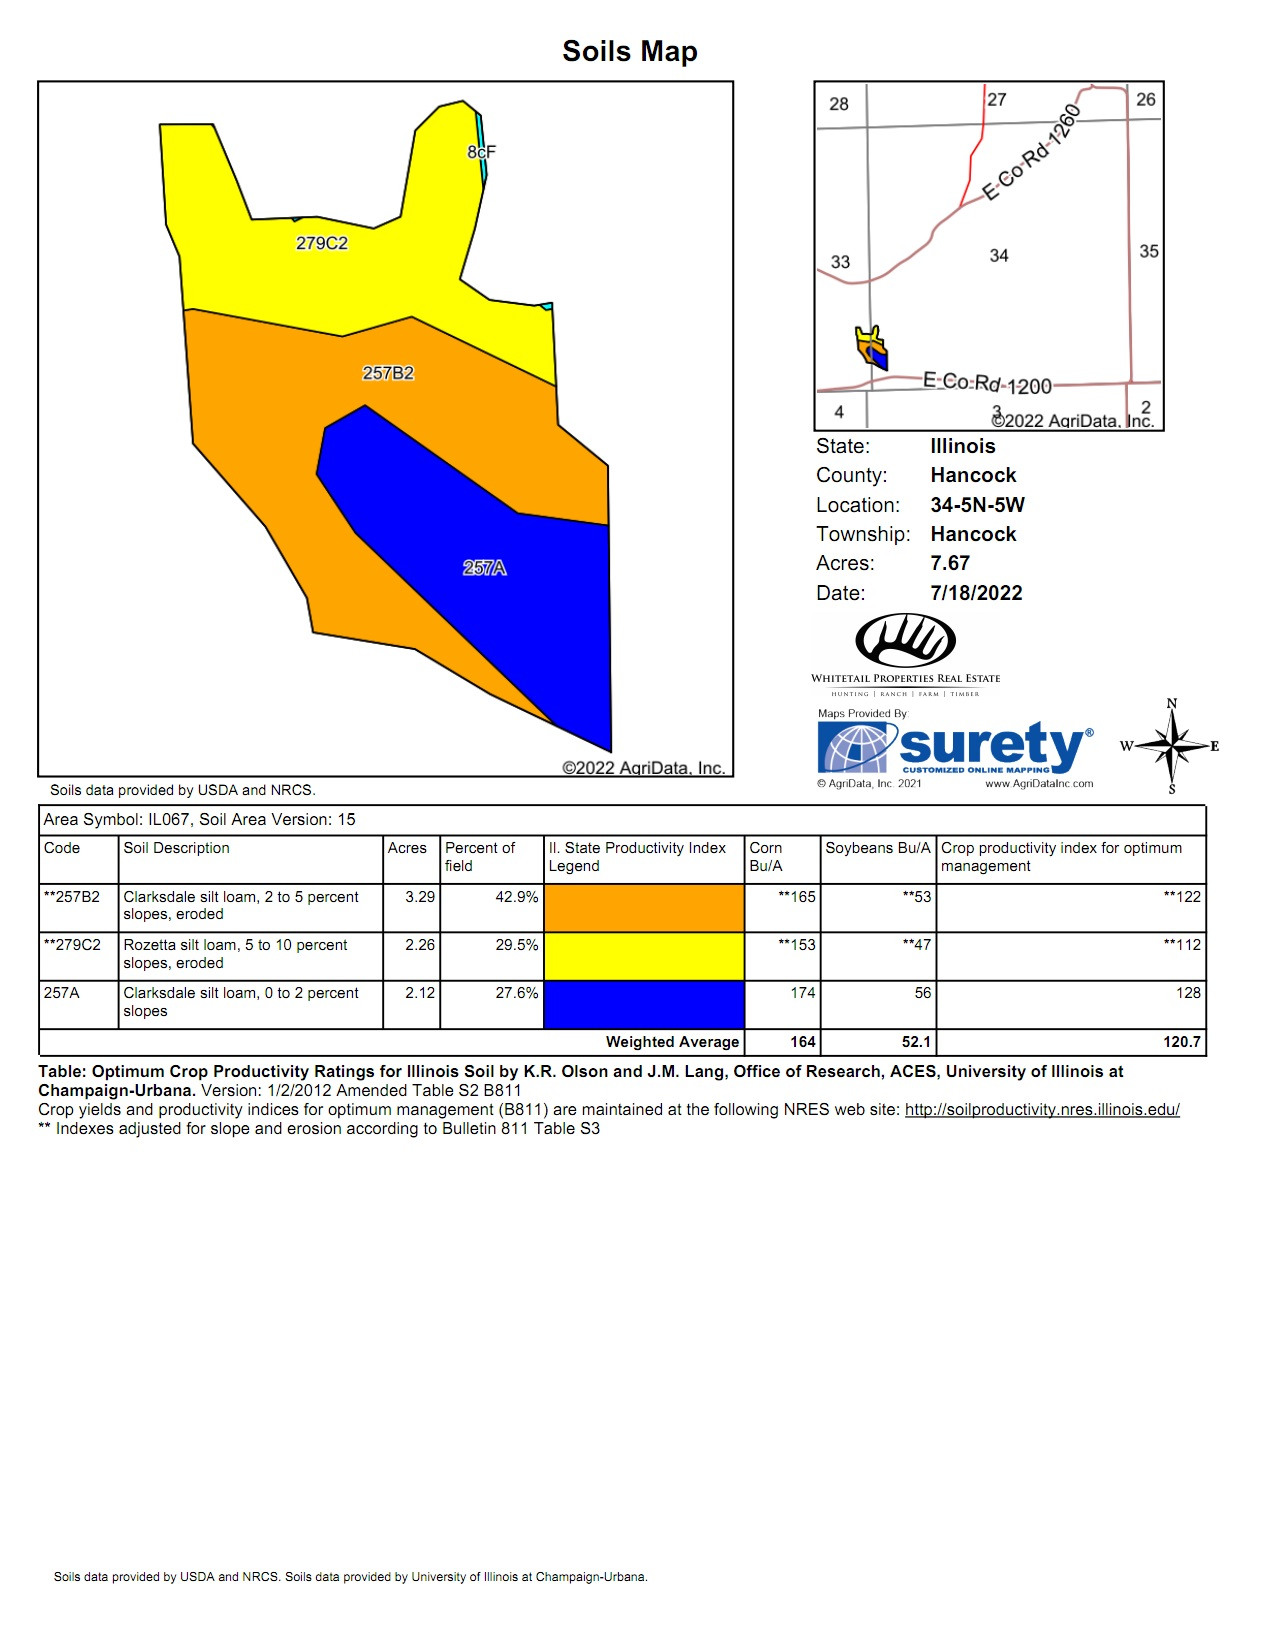 Soils Map tract 3